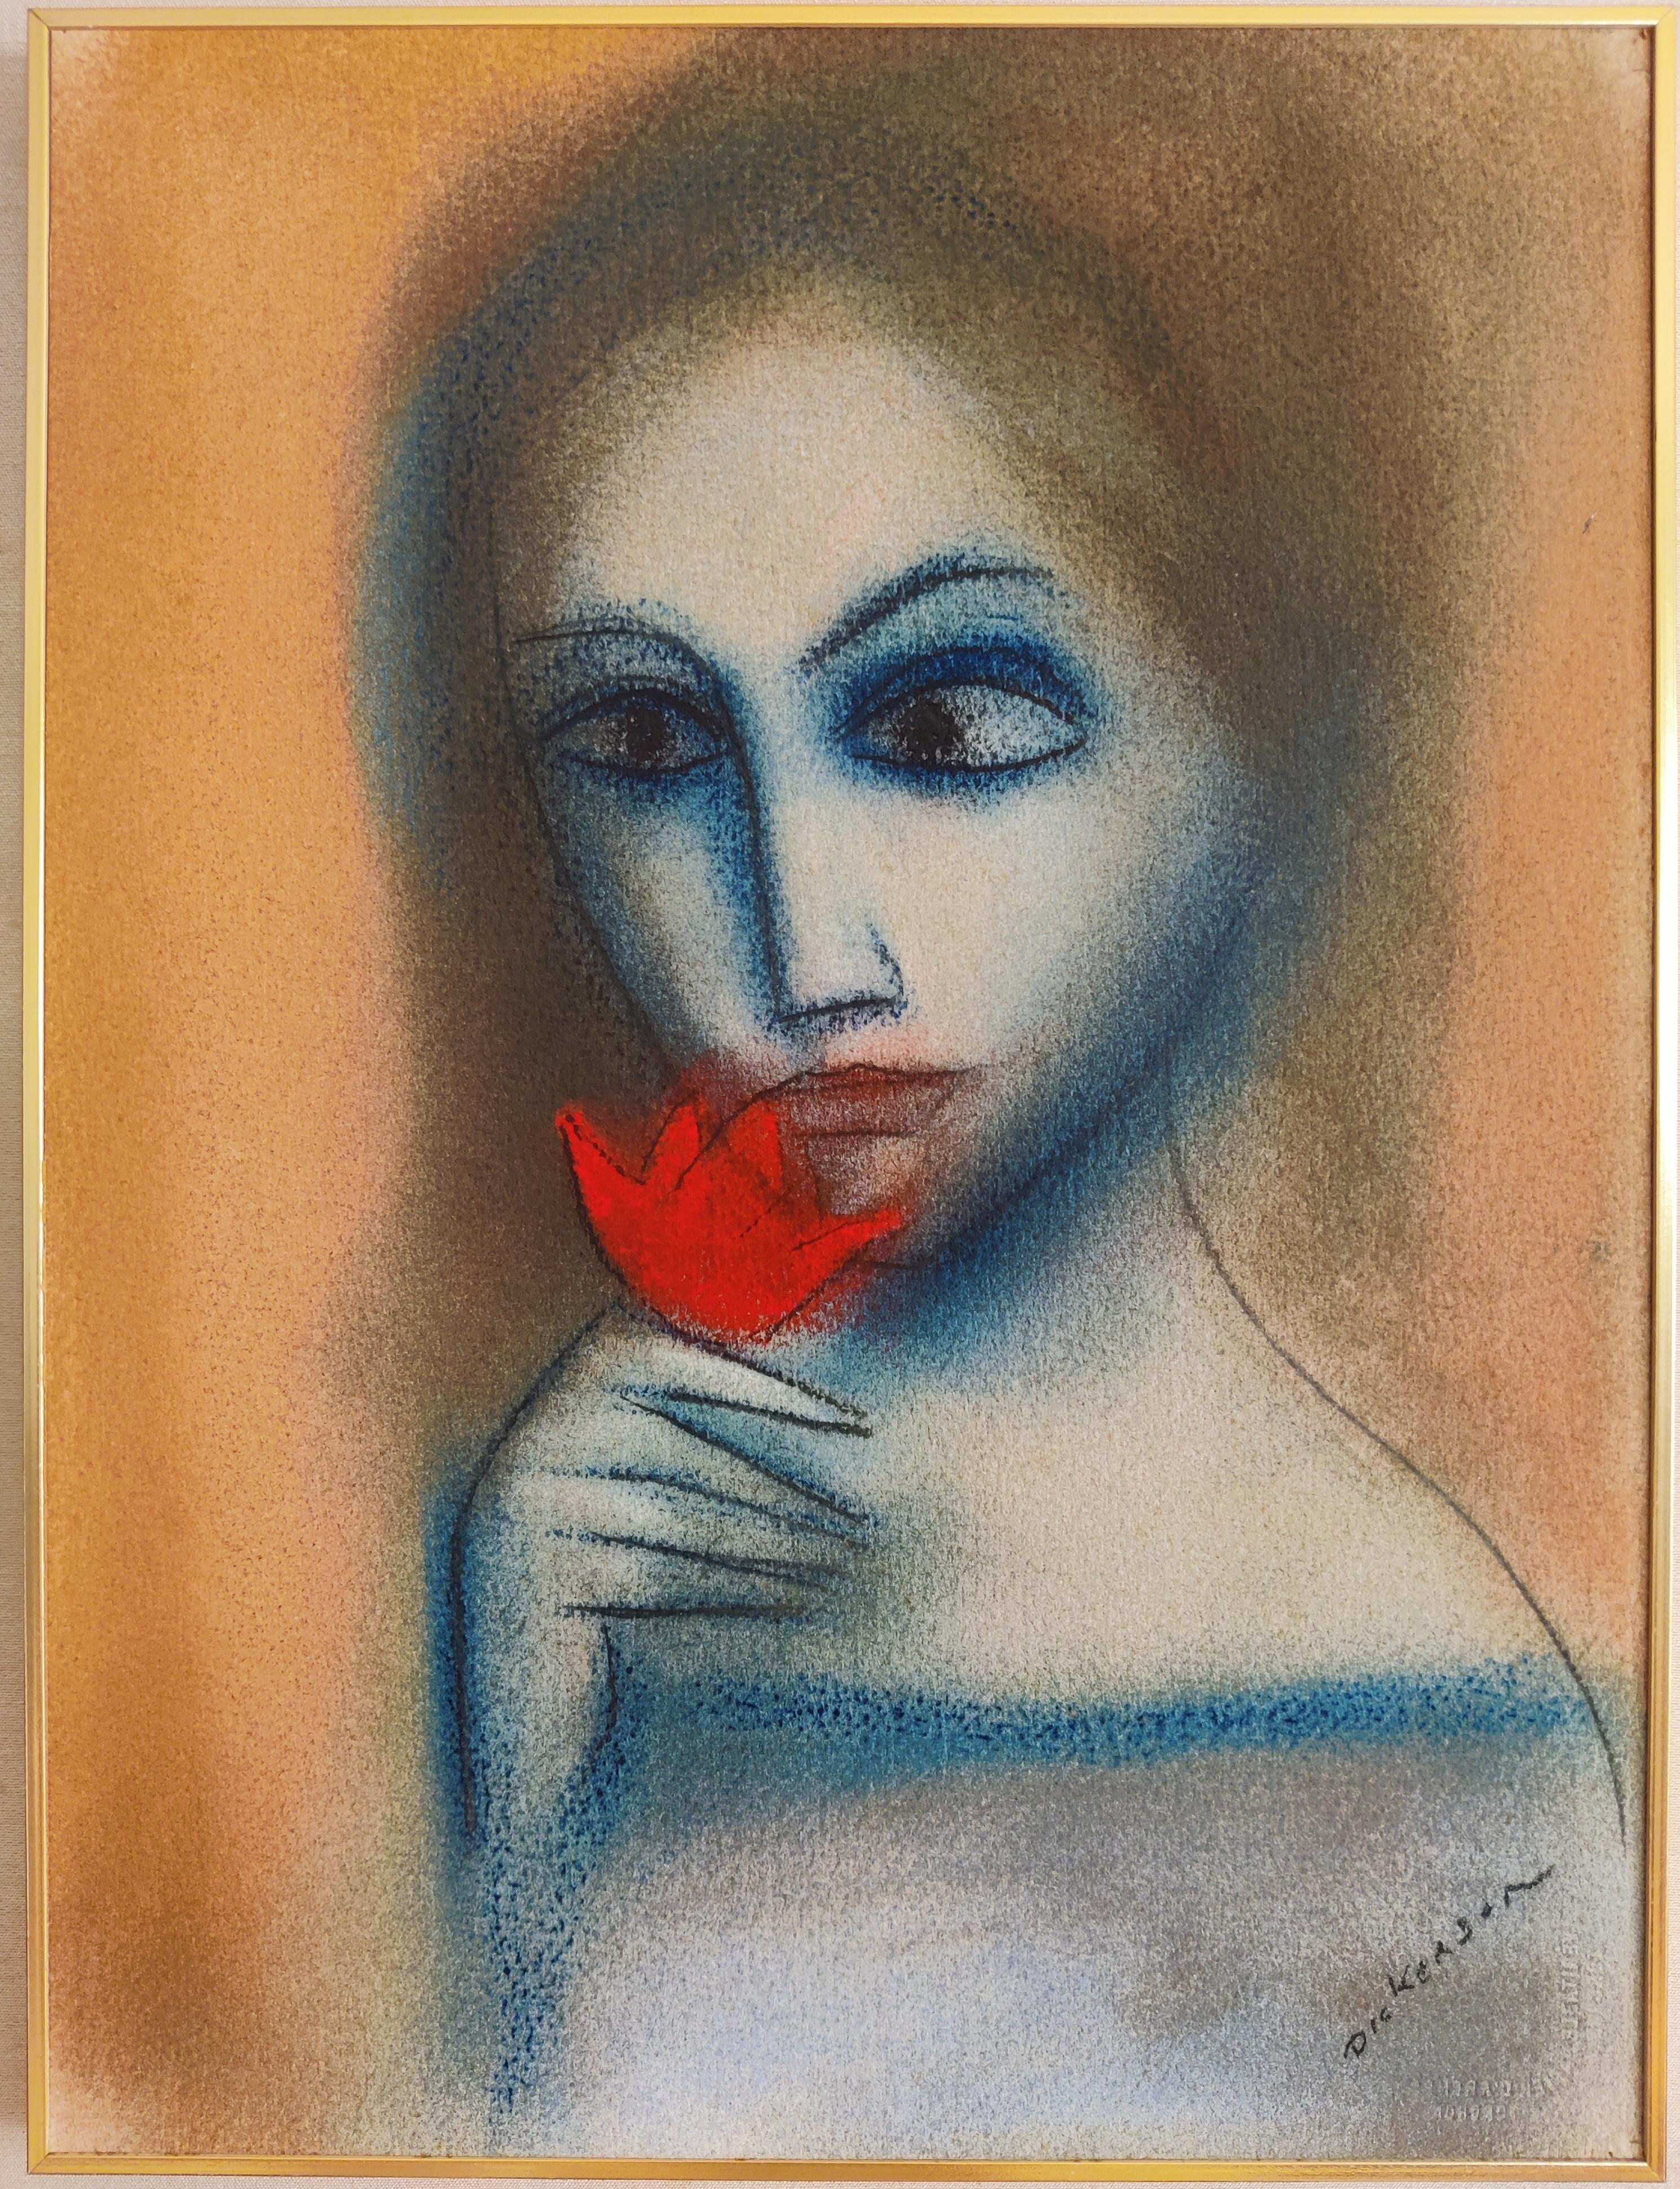 Robert Dickerson -- Girl With Flower 
Pastel on paper
Signed lower right
Image Size: 37.7 x 28.2
Frame Size: 61 x 47.5 x 2.5 cm
